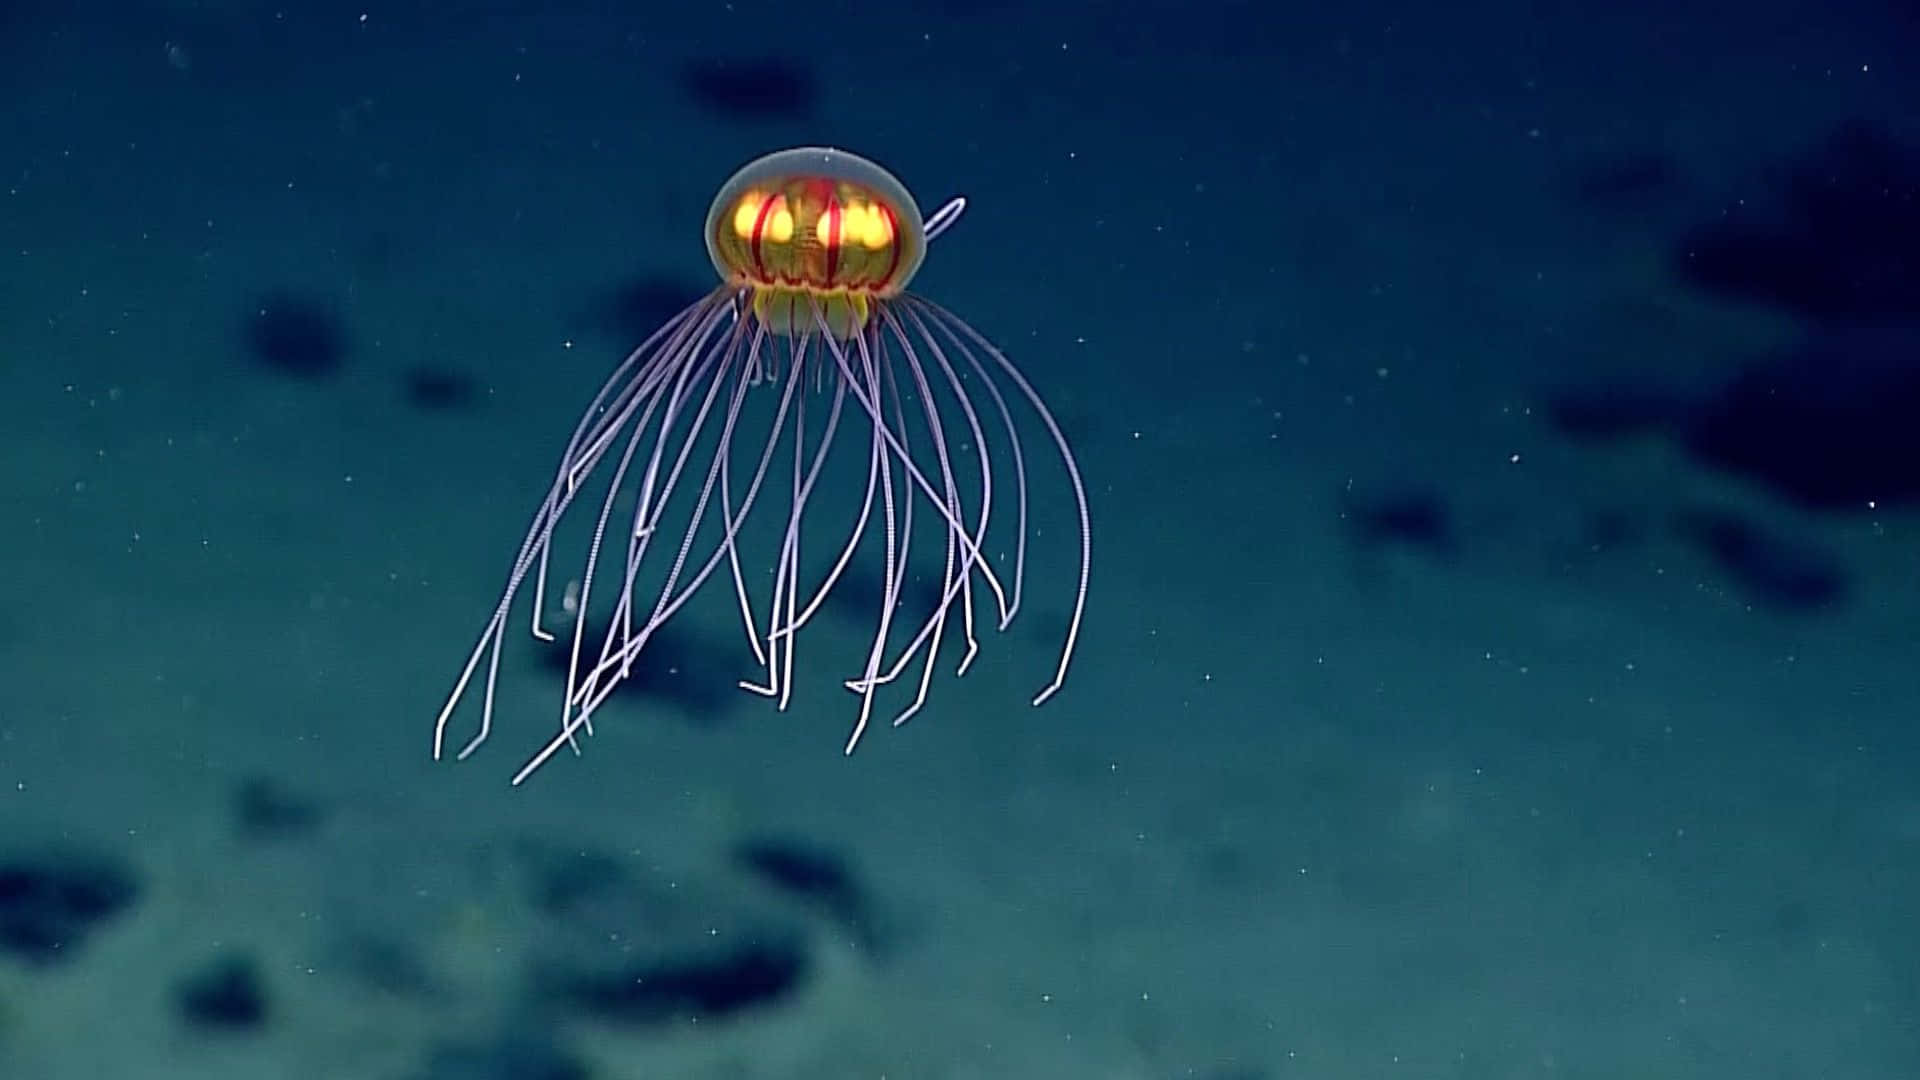 A Jellyfish With A Glowing Head And Tail